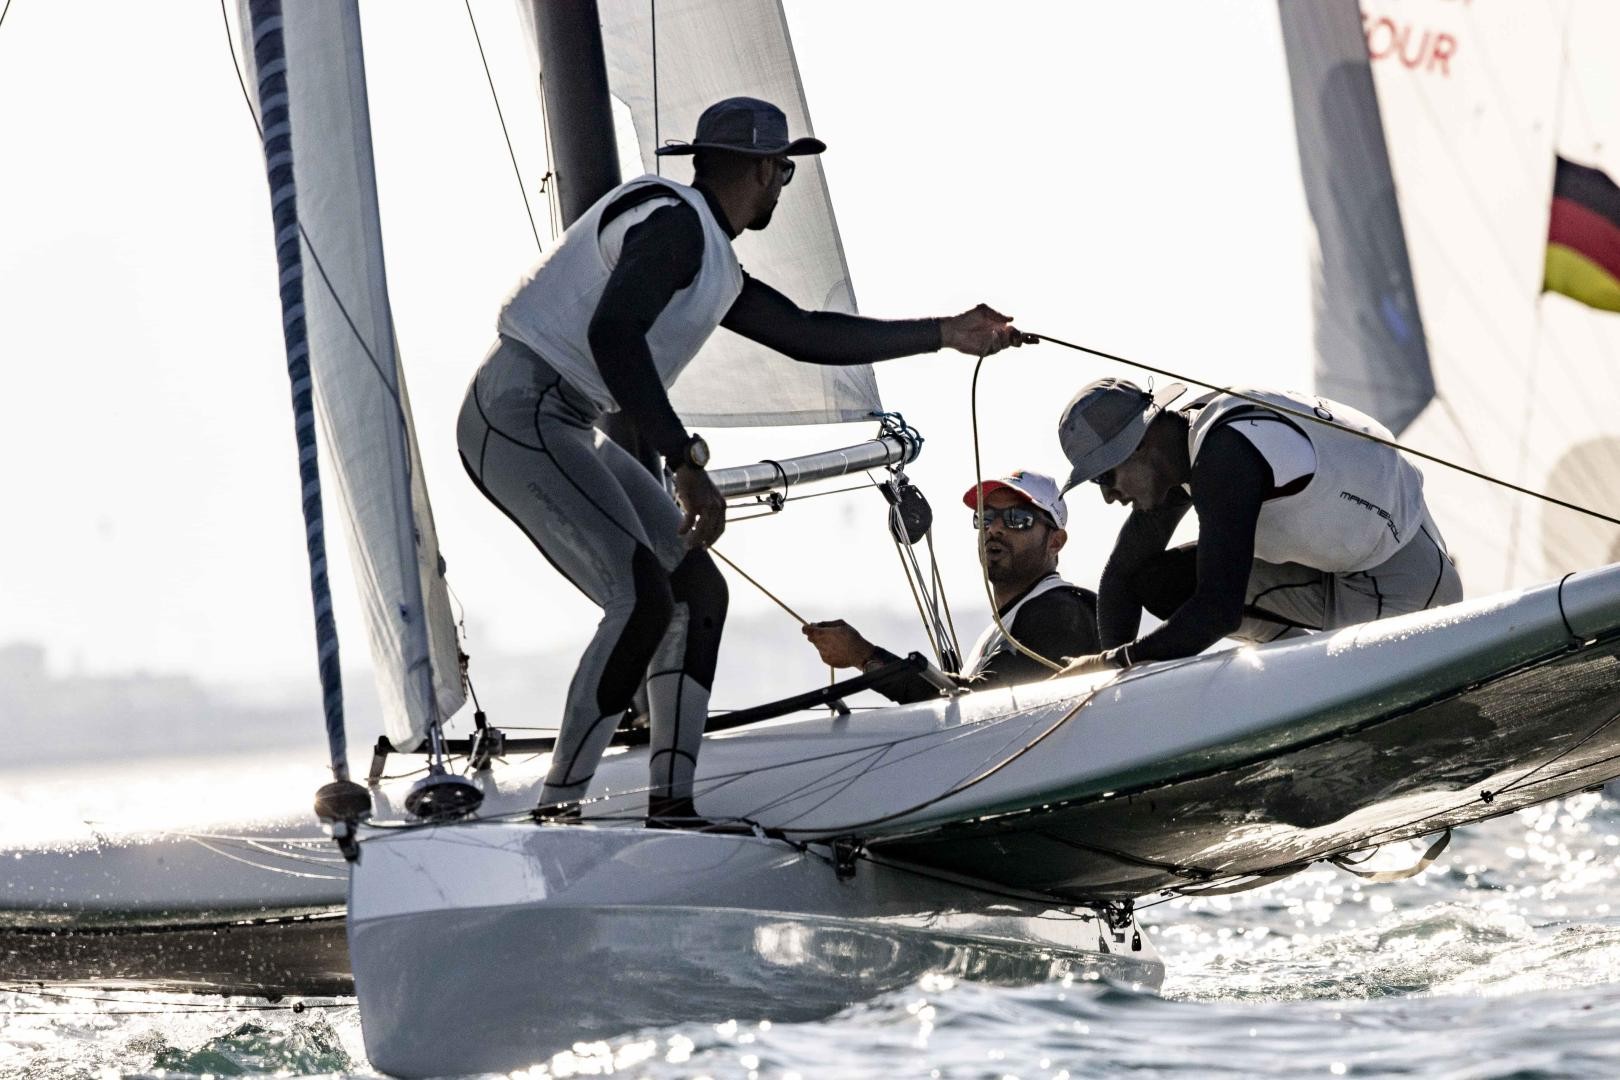 Team France enjoys a strong start to Sailing Arabia, The Tour 2021